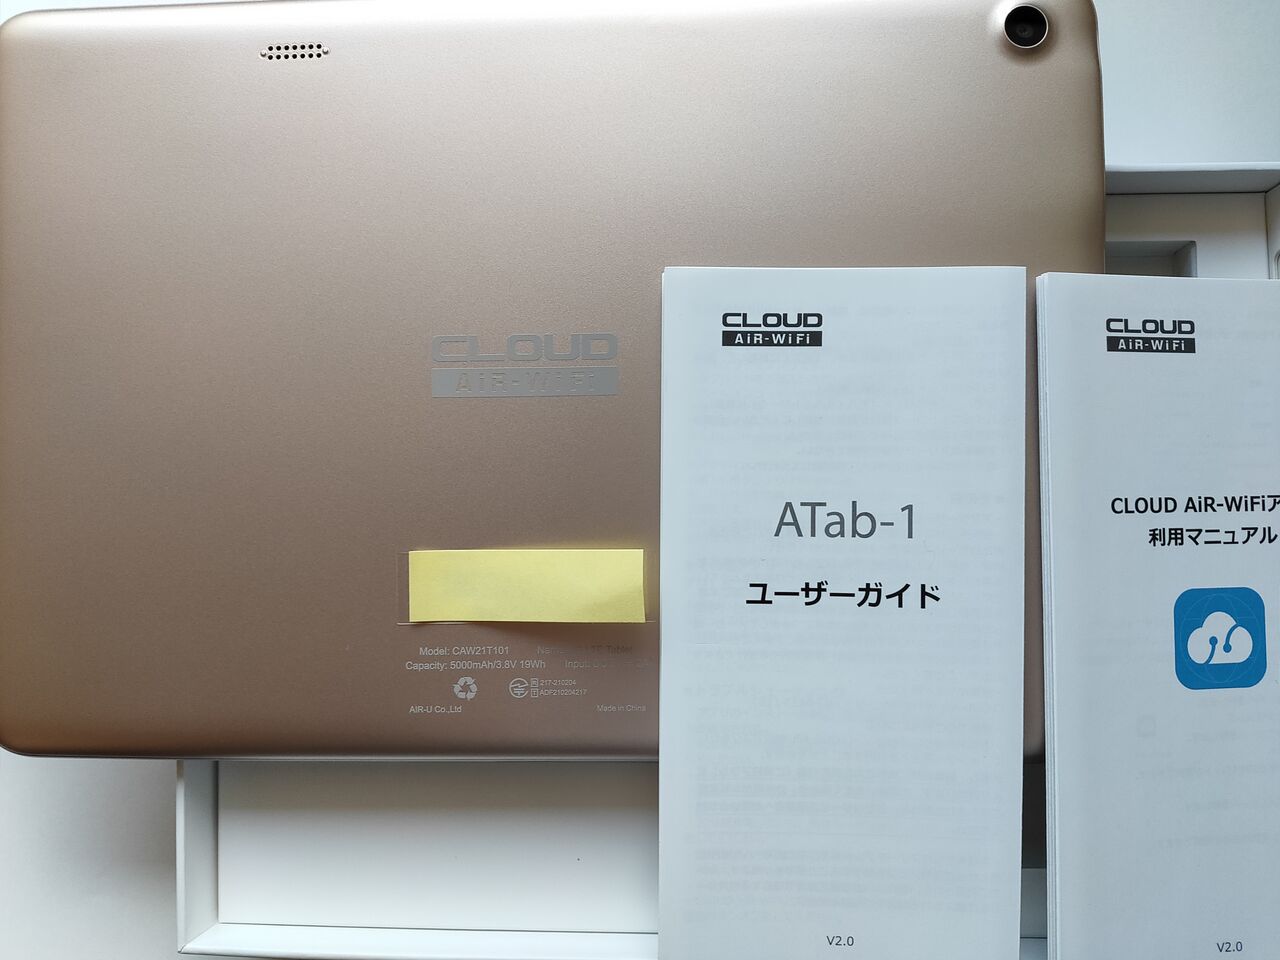 Androidタブレット AIR-U ATab-1 CAW21T101 - タブレットPC